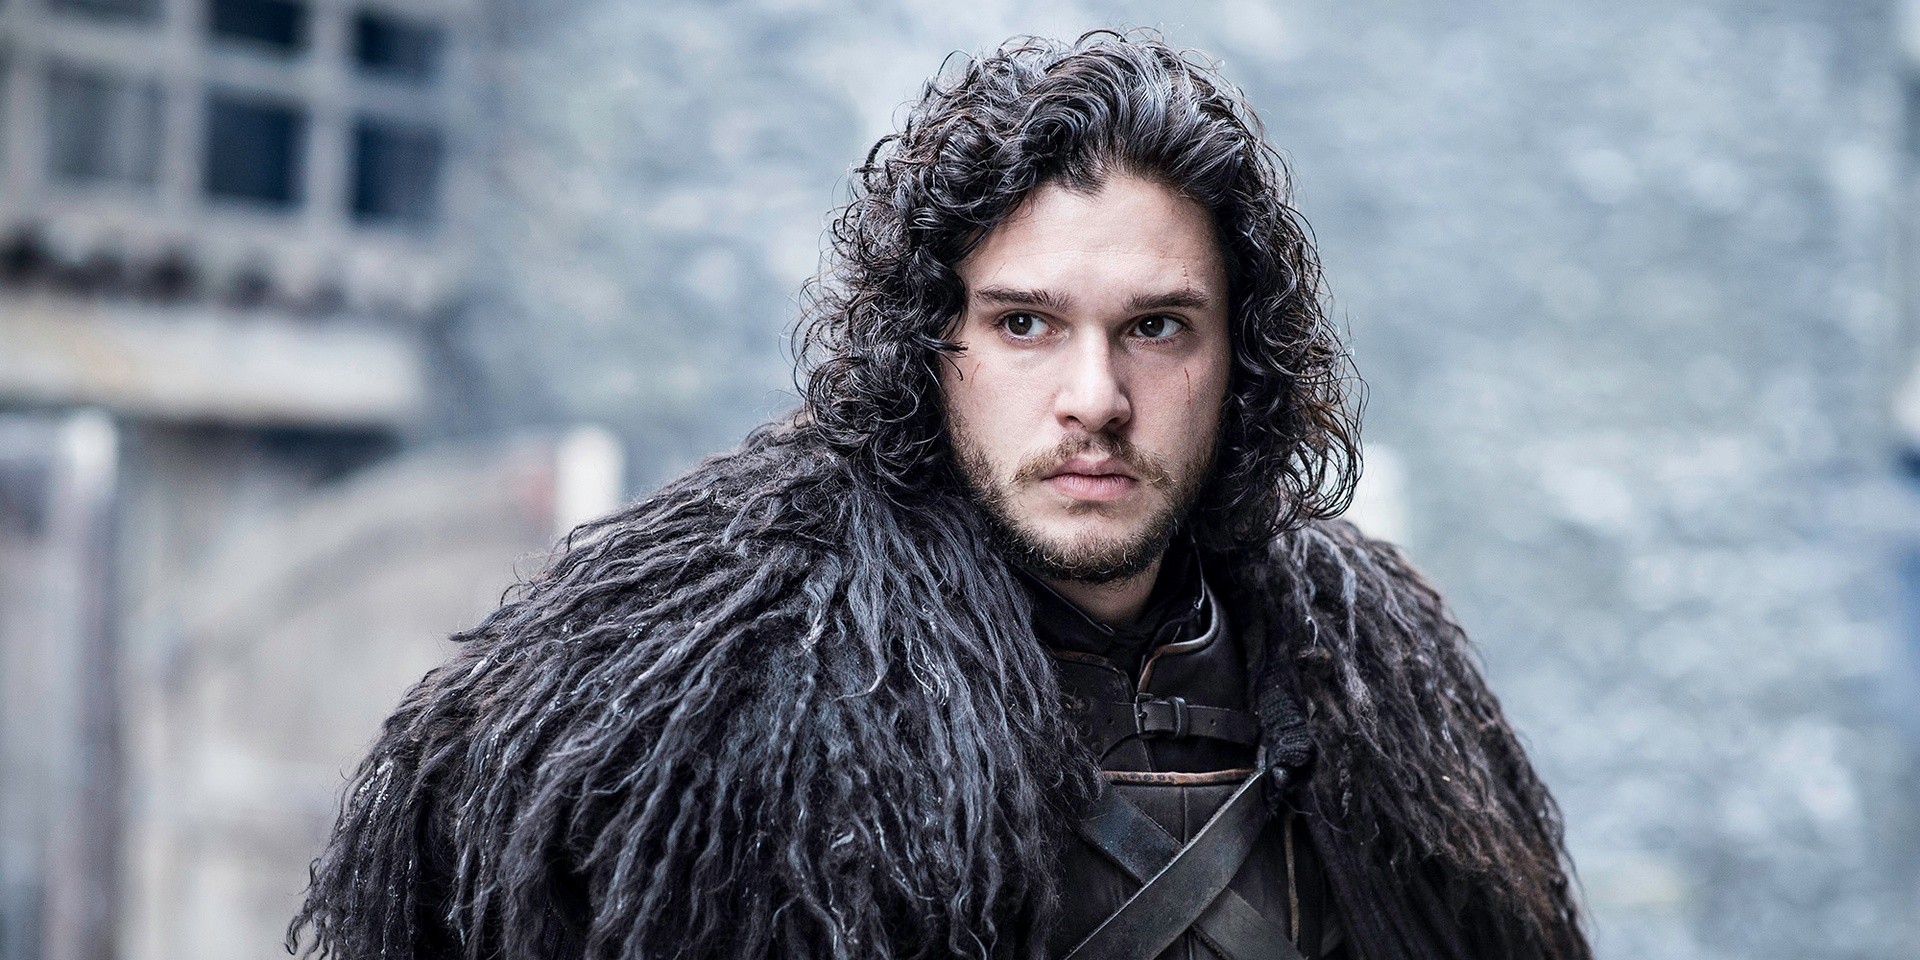 Spotify measures Singaporean music tastes through Game Of Thrones characters